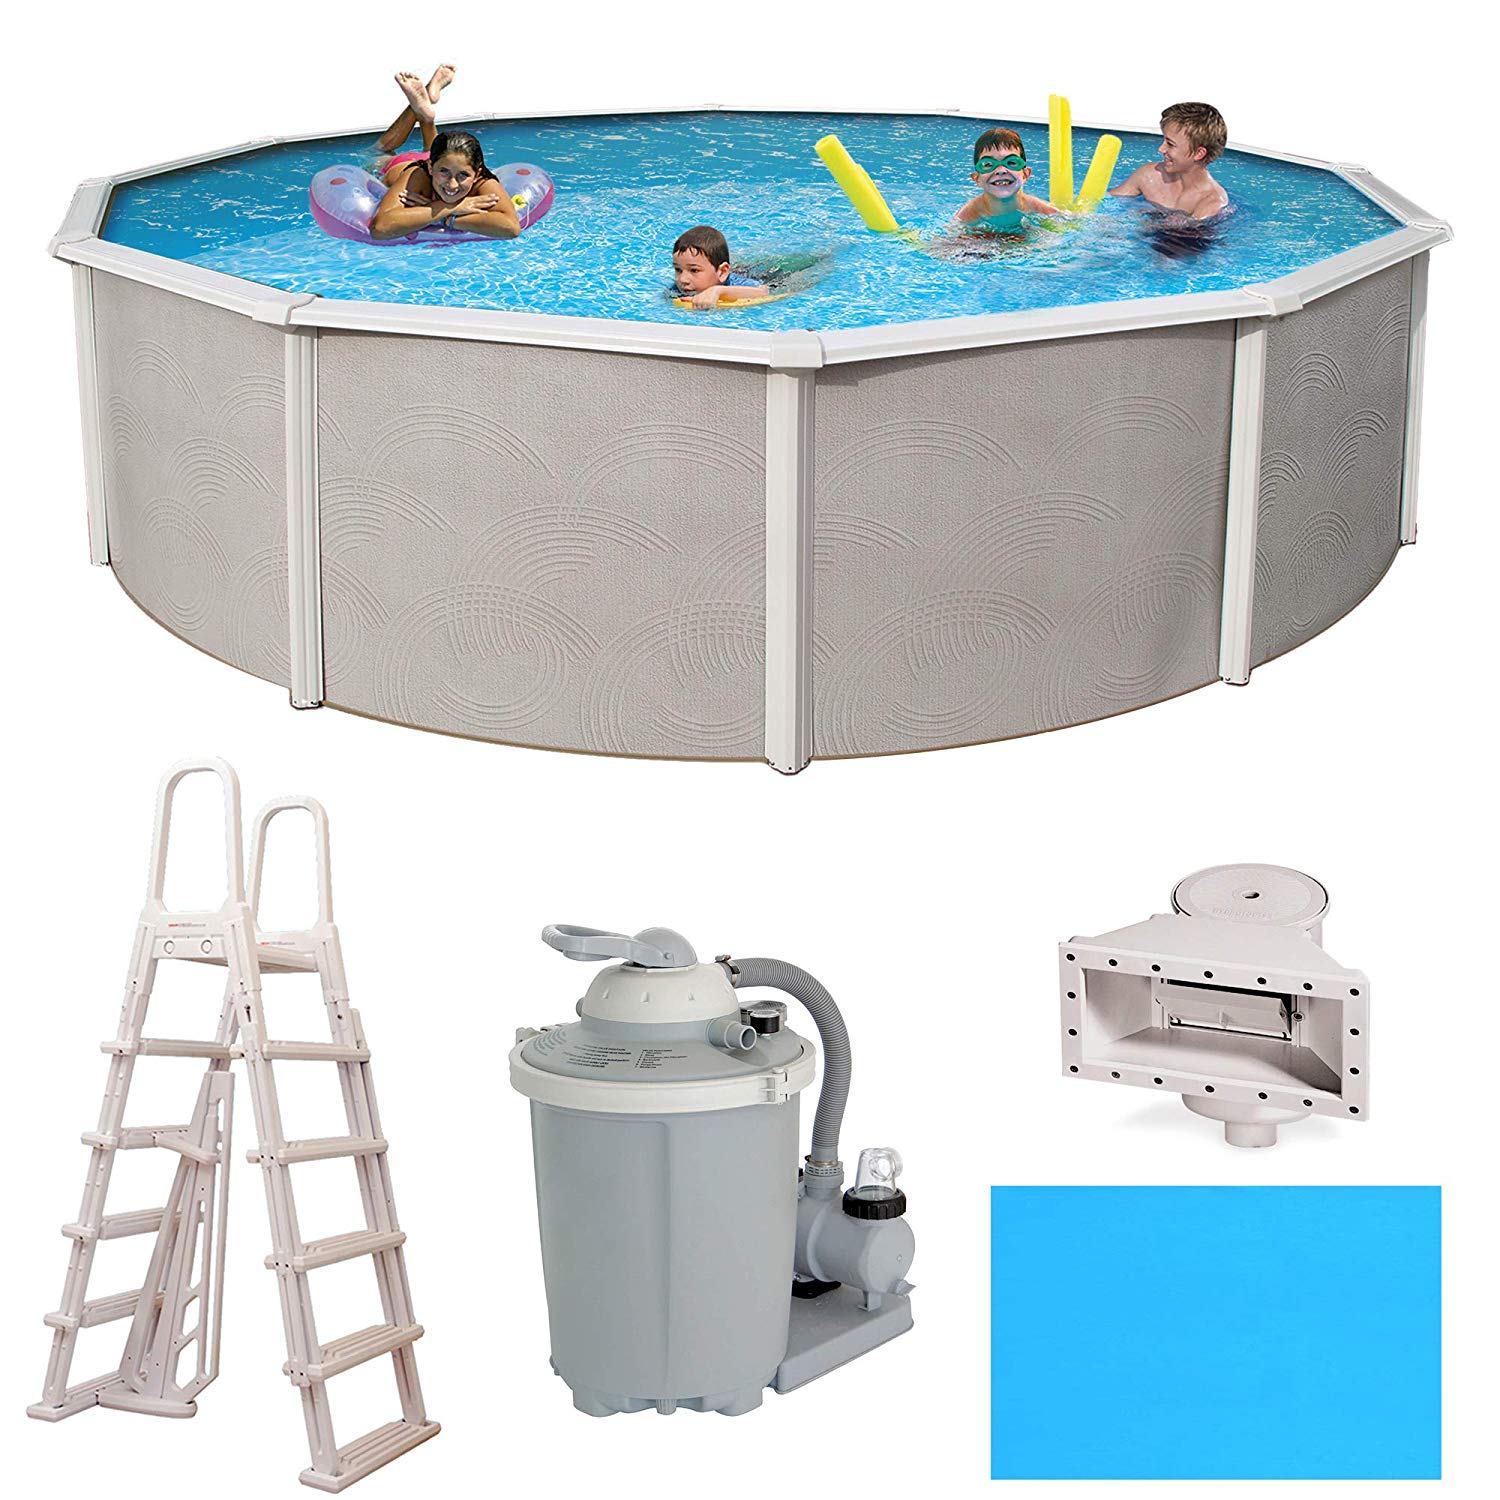 Barcelona Complete 18' x 52" Round Metal Wall Above Ground Best Sidewall Swimming Pool 